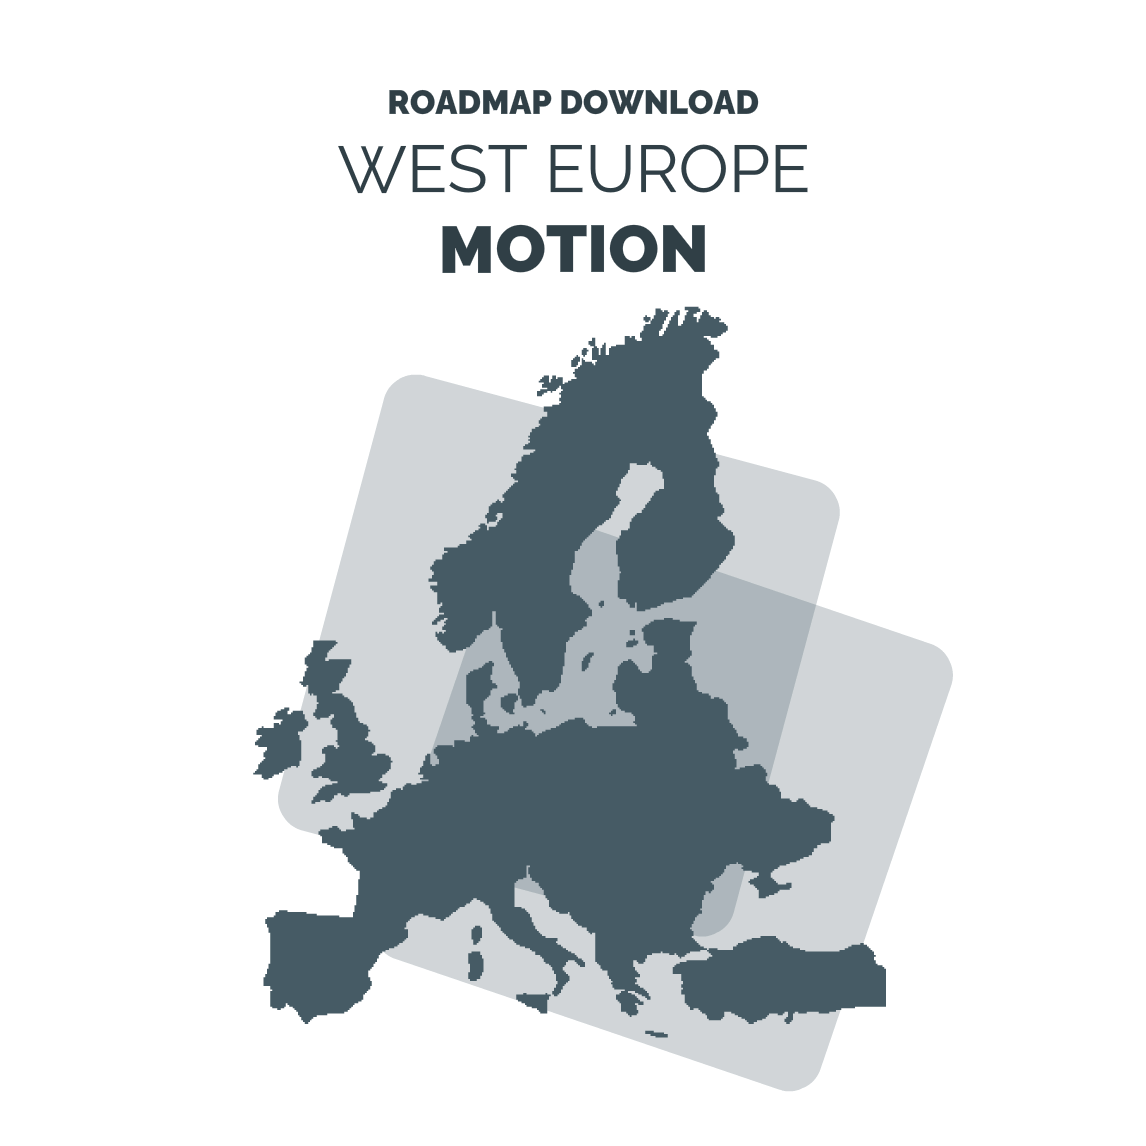 Road Map Europe Motion West 2021 - OEMNAVIGATIONS